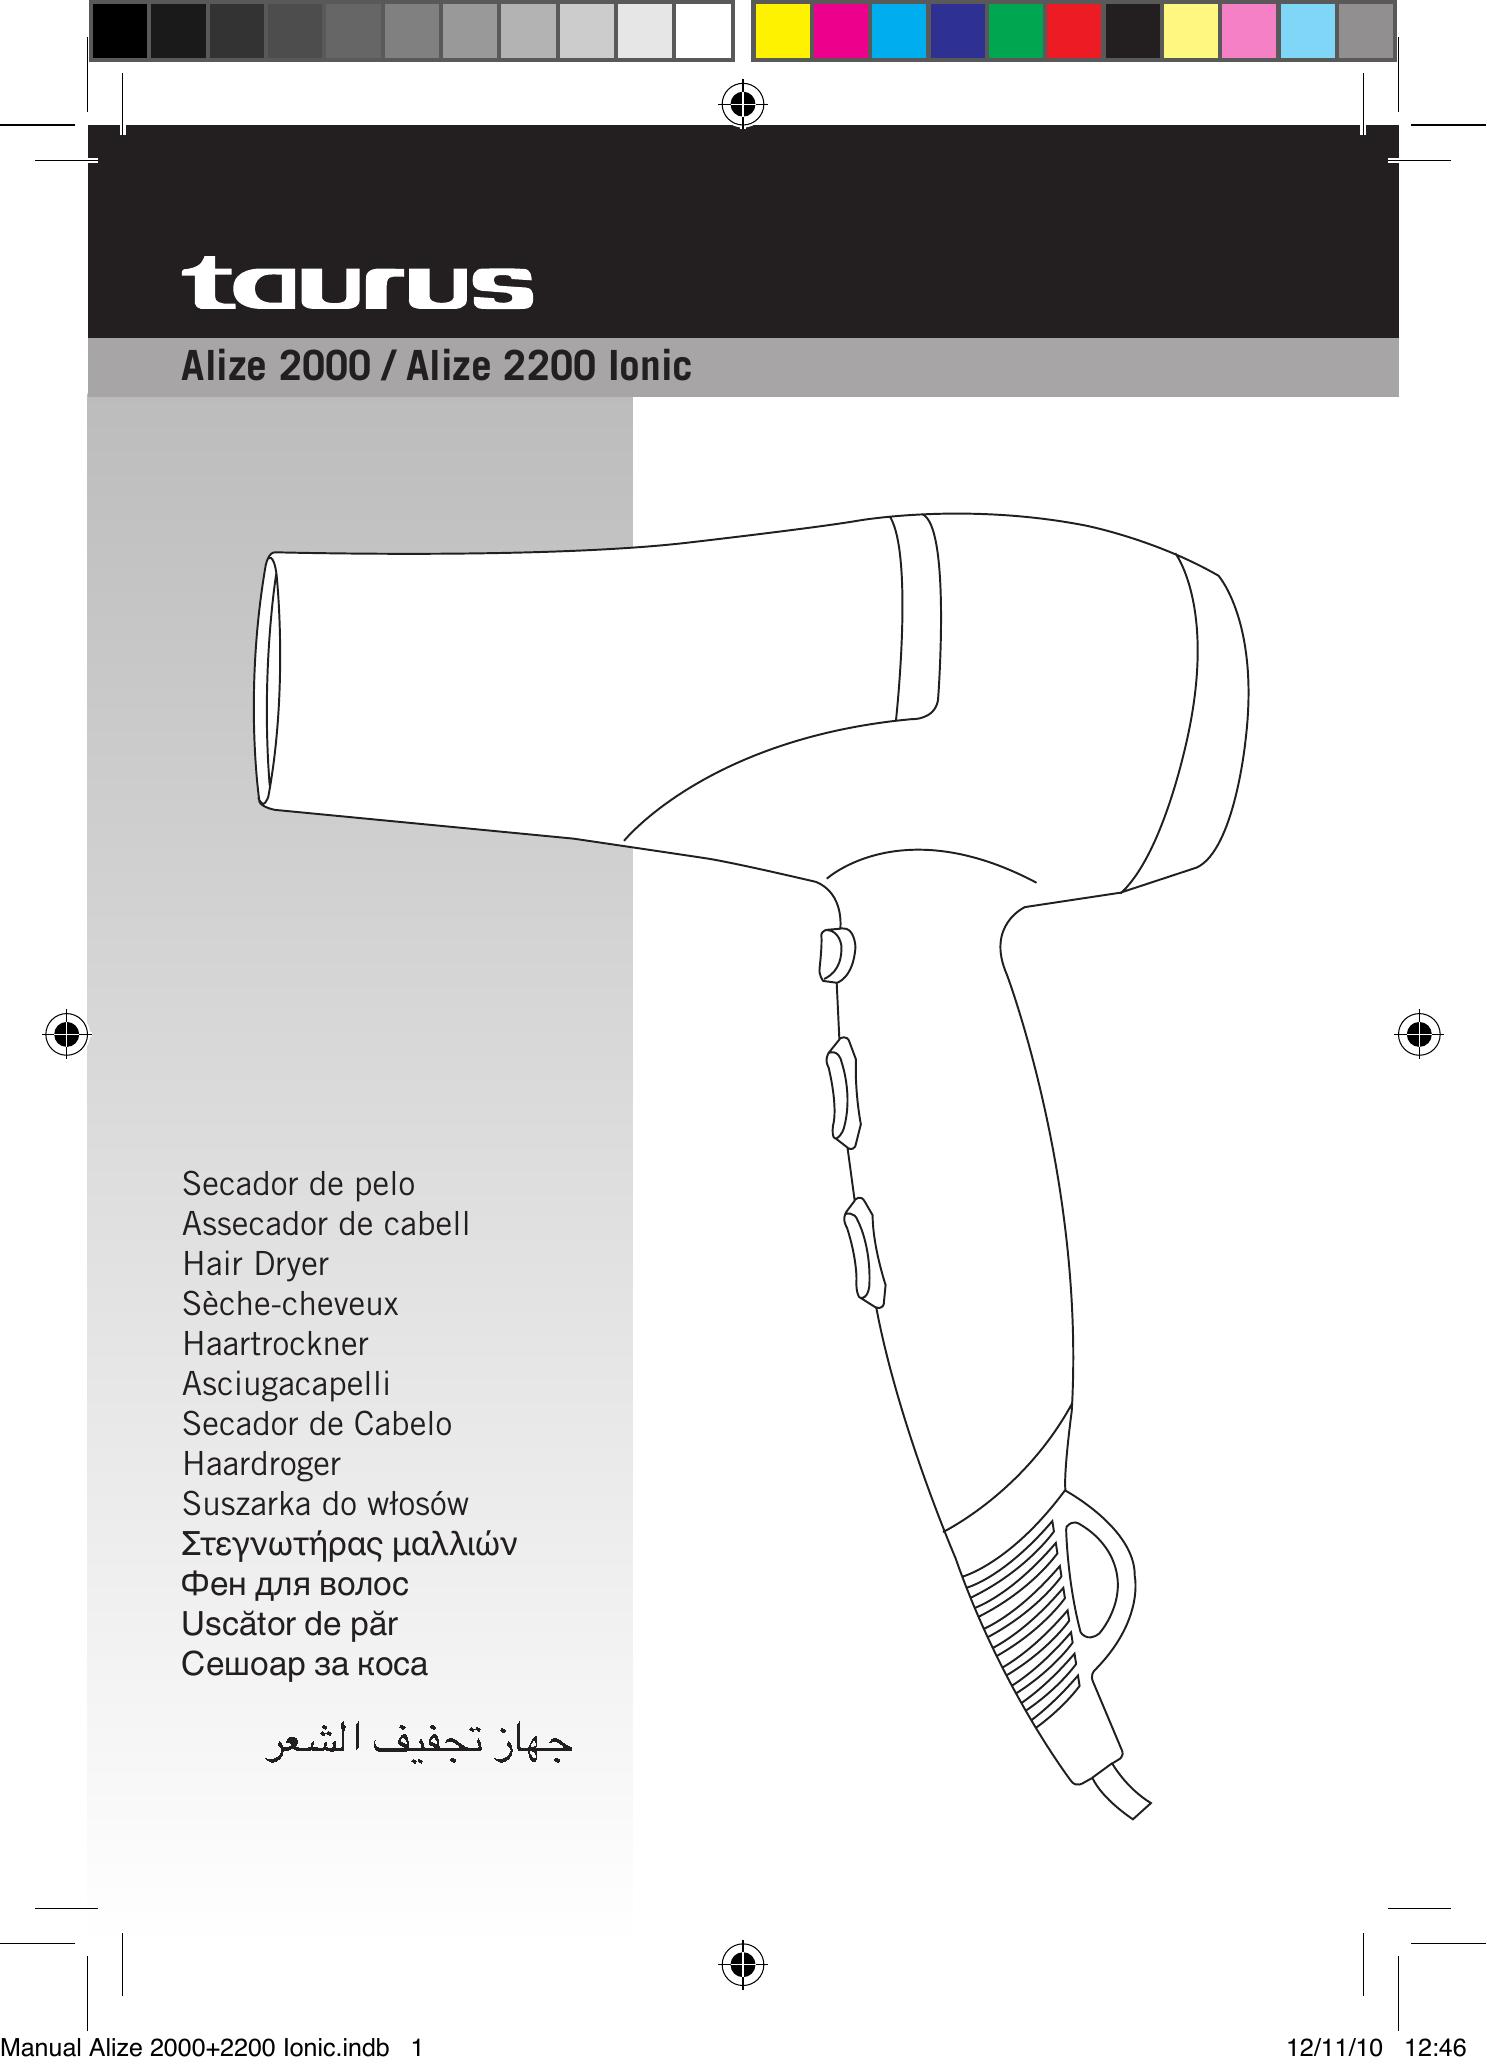 Taurus Group ALIZE 200 IONIC Hair Dryer User Manual